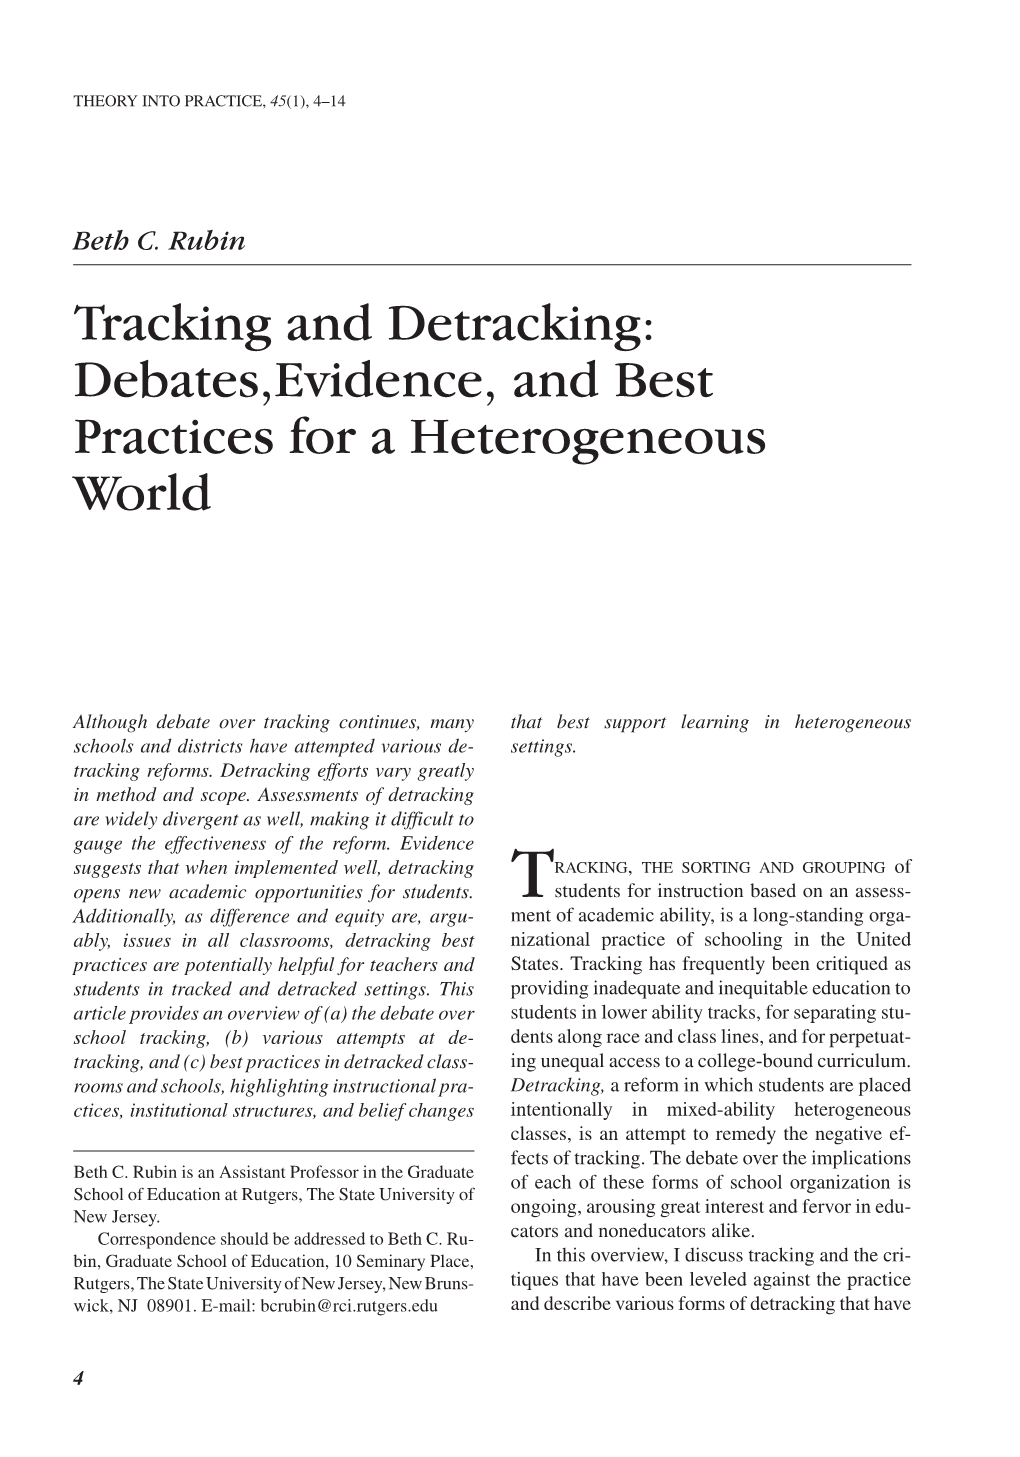 Tracking and Detracking: Debates,Evidence, and Best Practices for a Heterogeneous World